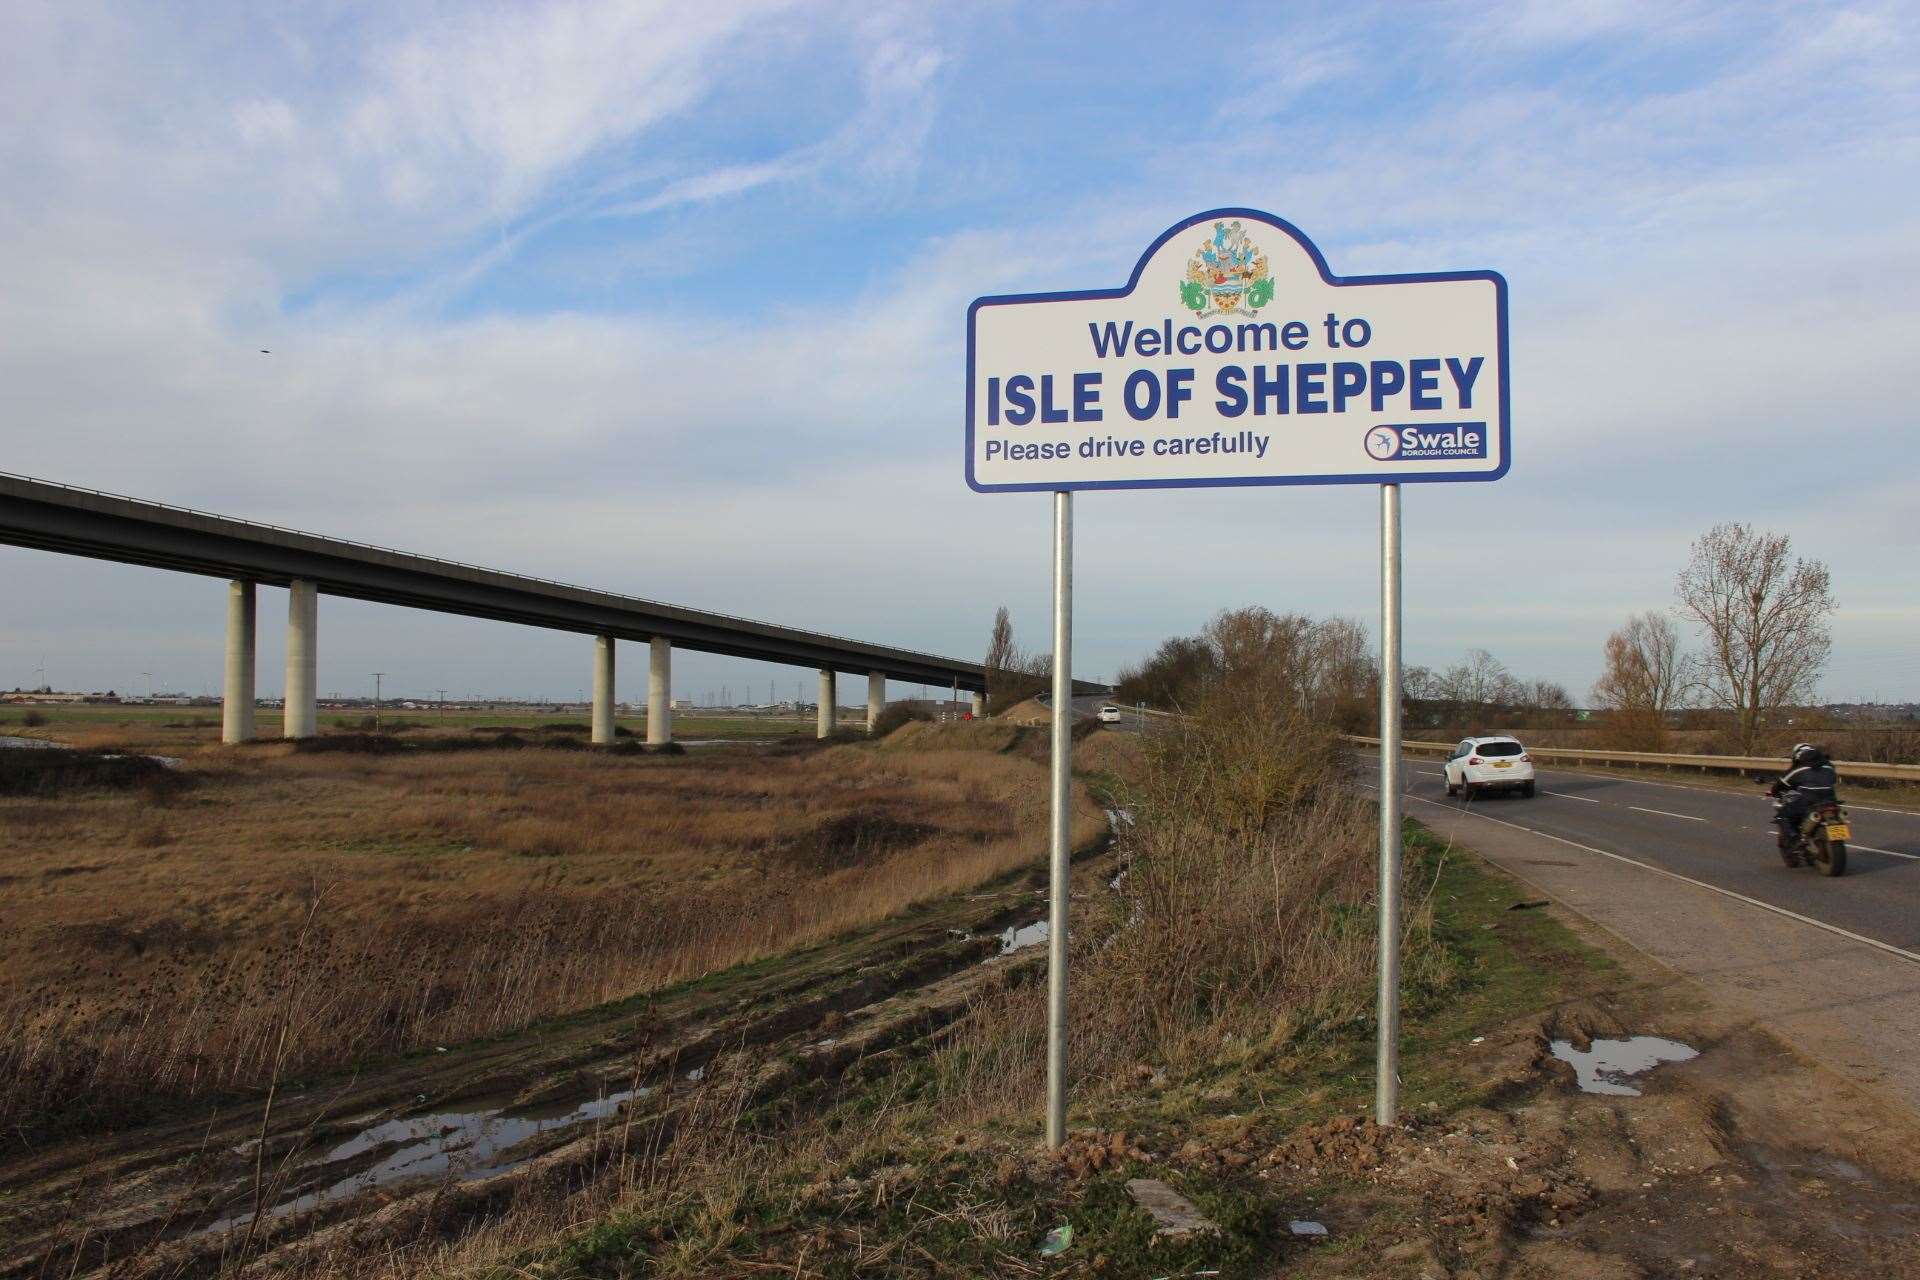 Welcome to the Isle of Sheppey sign (42027743)